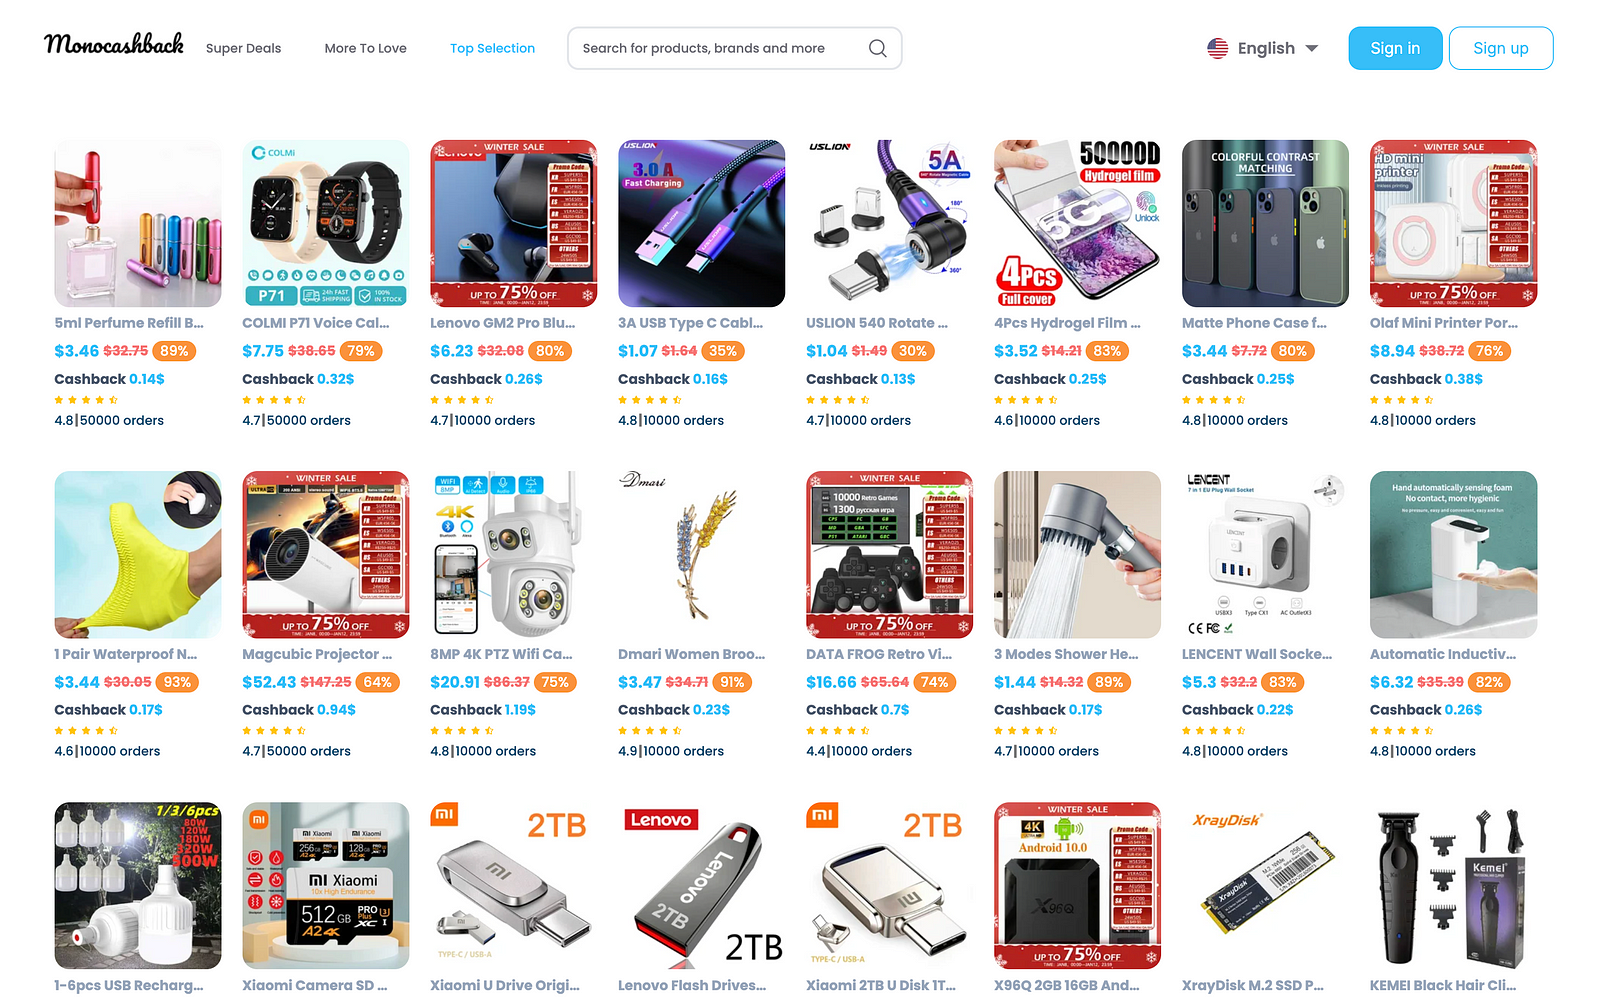 Unlock Cashback and Promocodes for AliExpress with Monocashback